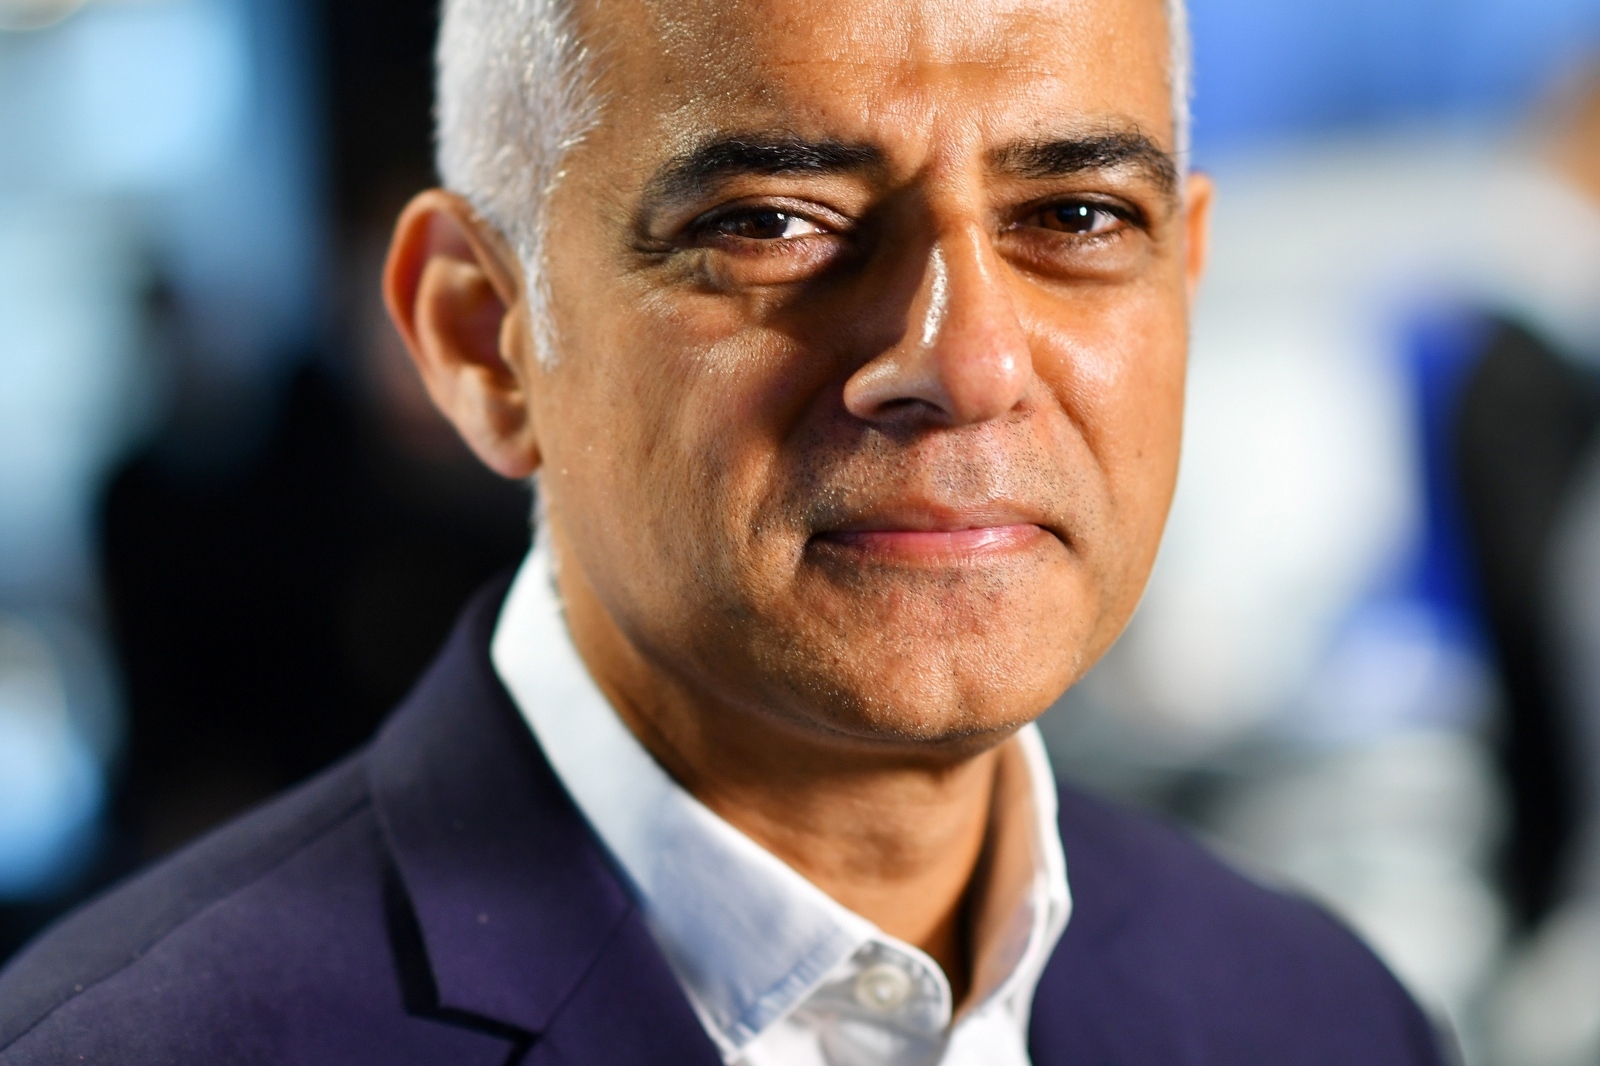 Mayor of London Sadiq Khan poses during an interview with Reuters at an event to promote the start of London Tech Week Mayor of London Sadiq Khan poses during an interview with Reuters at an event to promote the start of London Tech Week, in London, Britain, June 10, 2019.  REUTERS/Dylan Martinez DYLAN MARTINEZ